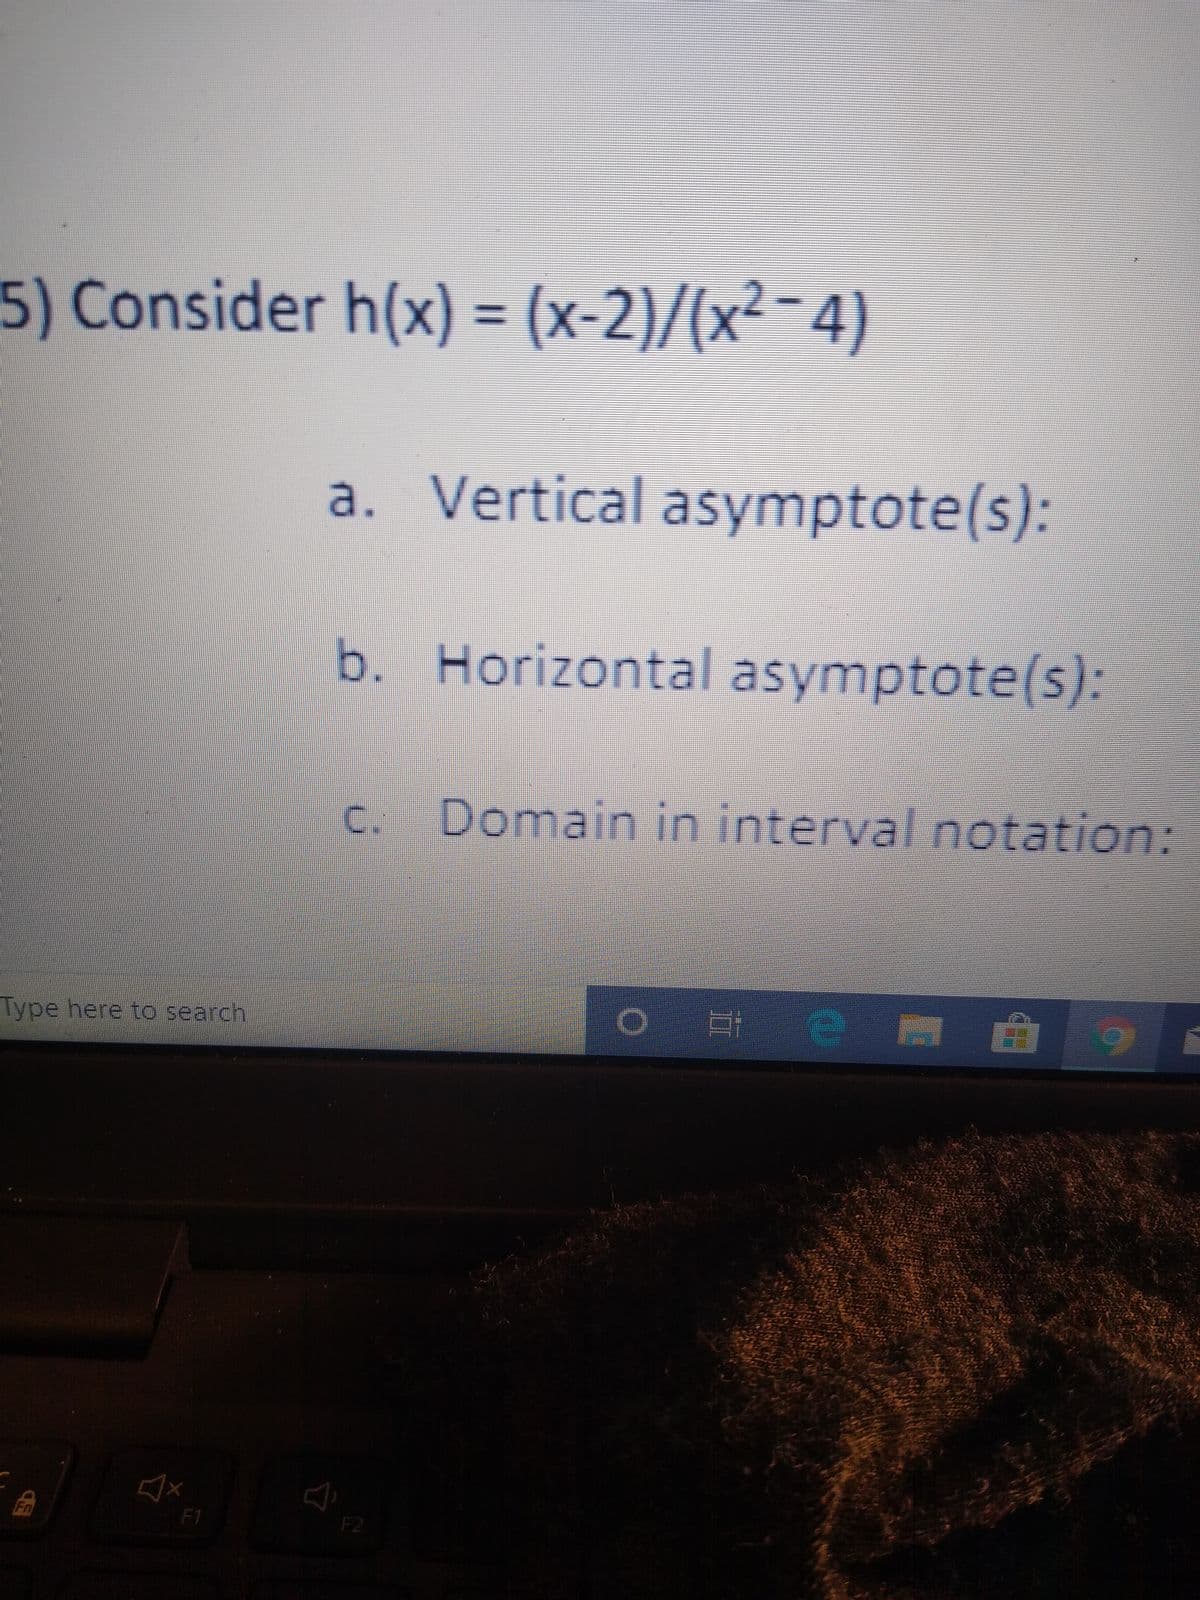 5) Consider h(x) = (x-2)/(x²-4)
a. Vertical asymptote(s):
b. Horizontal asymptote(s):
C.
Domain in interval notation:
Type here to search
Fn
F1
F2
